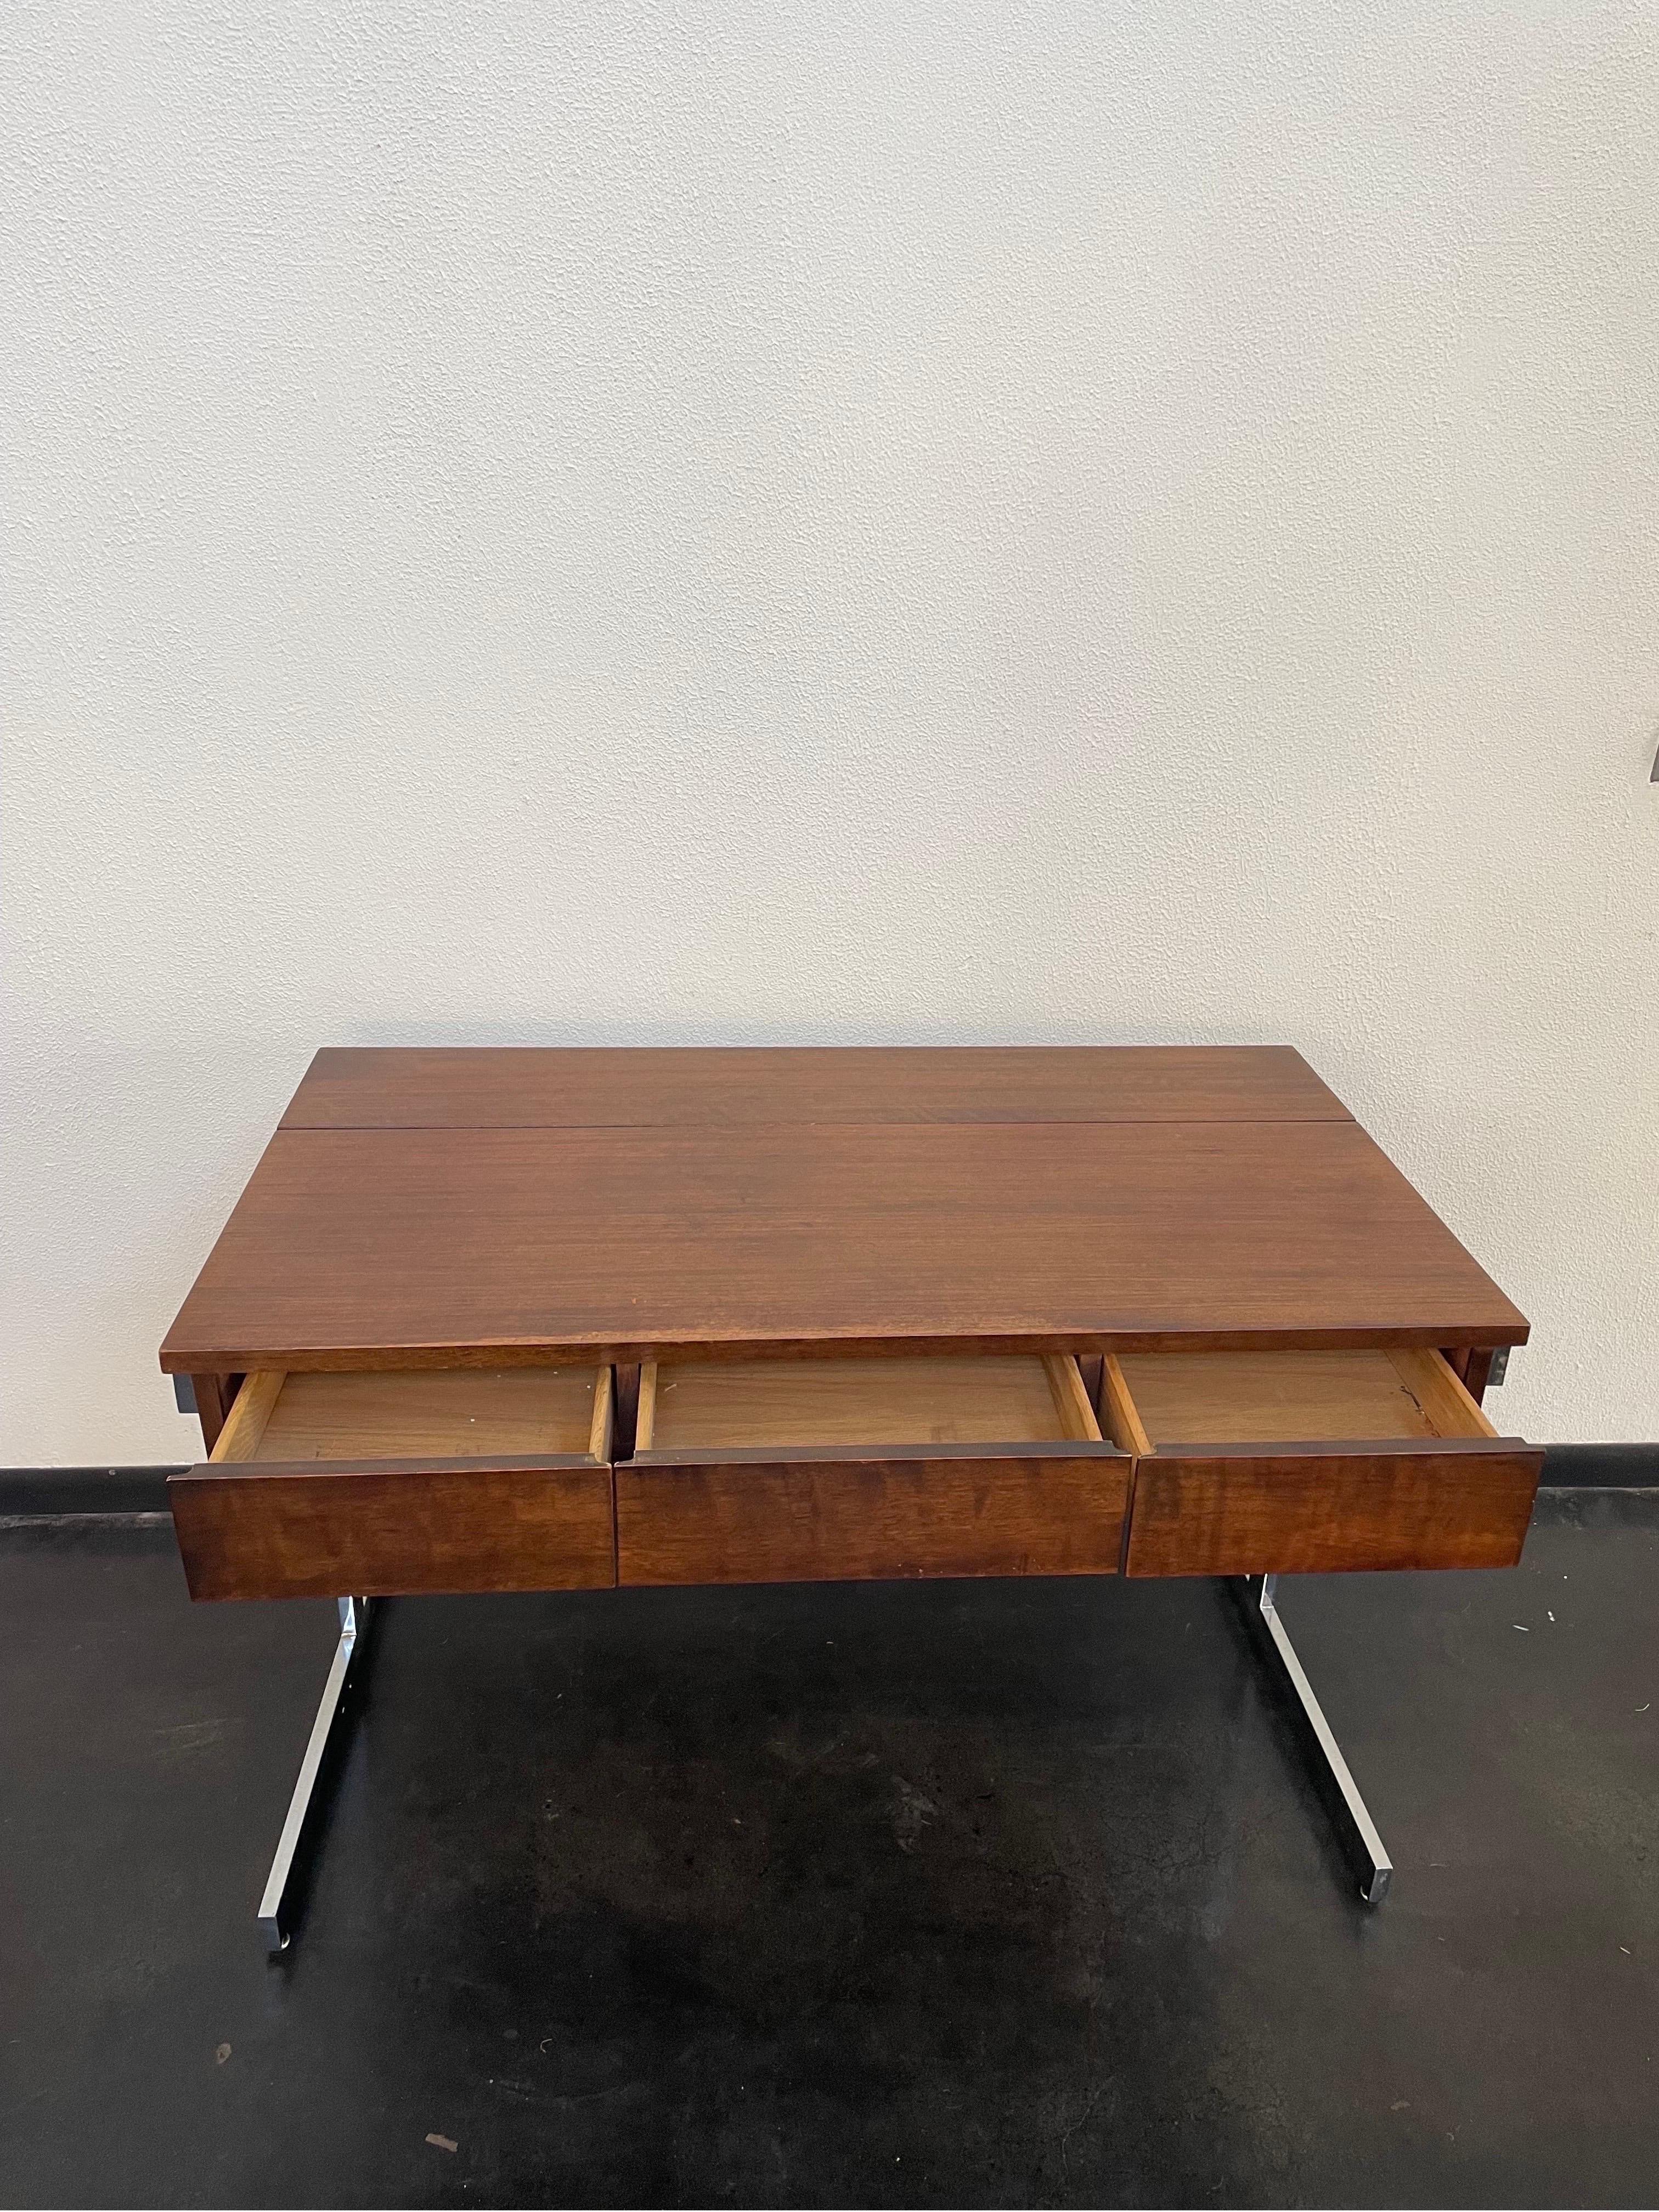 Solid rosewood Mid-Century Modern desk by Lane Furniture. There are three front side-by-side pullout drawers and a flush lift-top compartment at the back for storage. The desk is finished with T-shaped chrome legs.